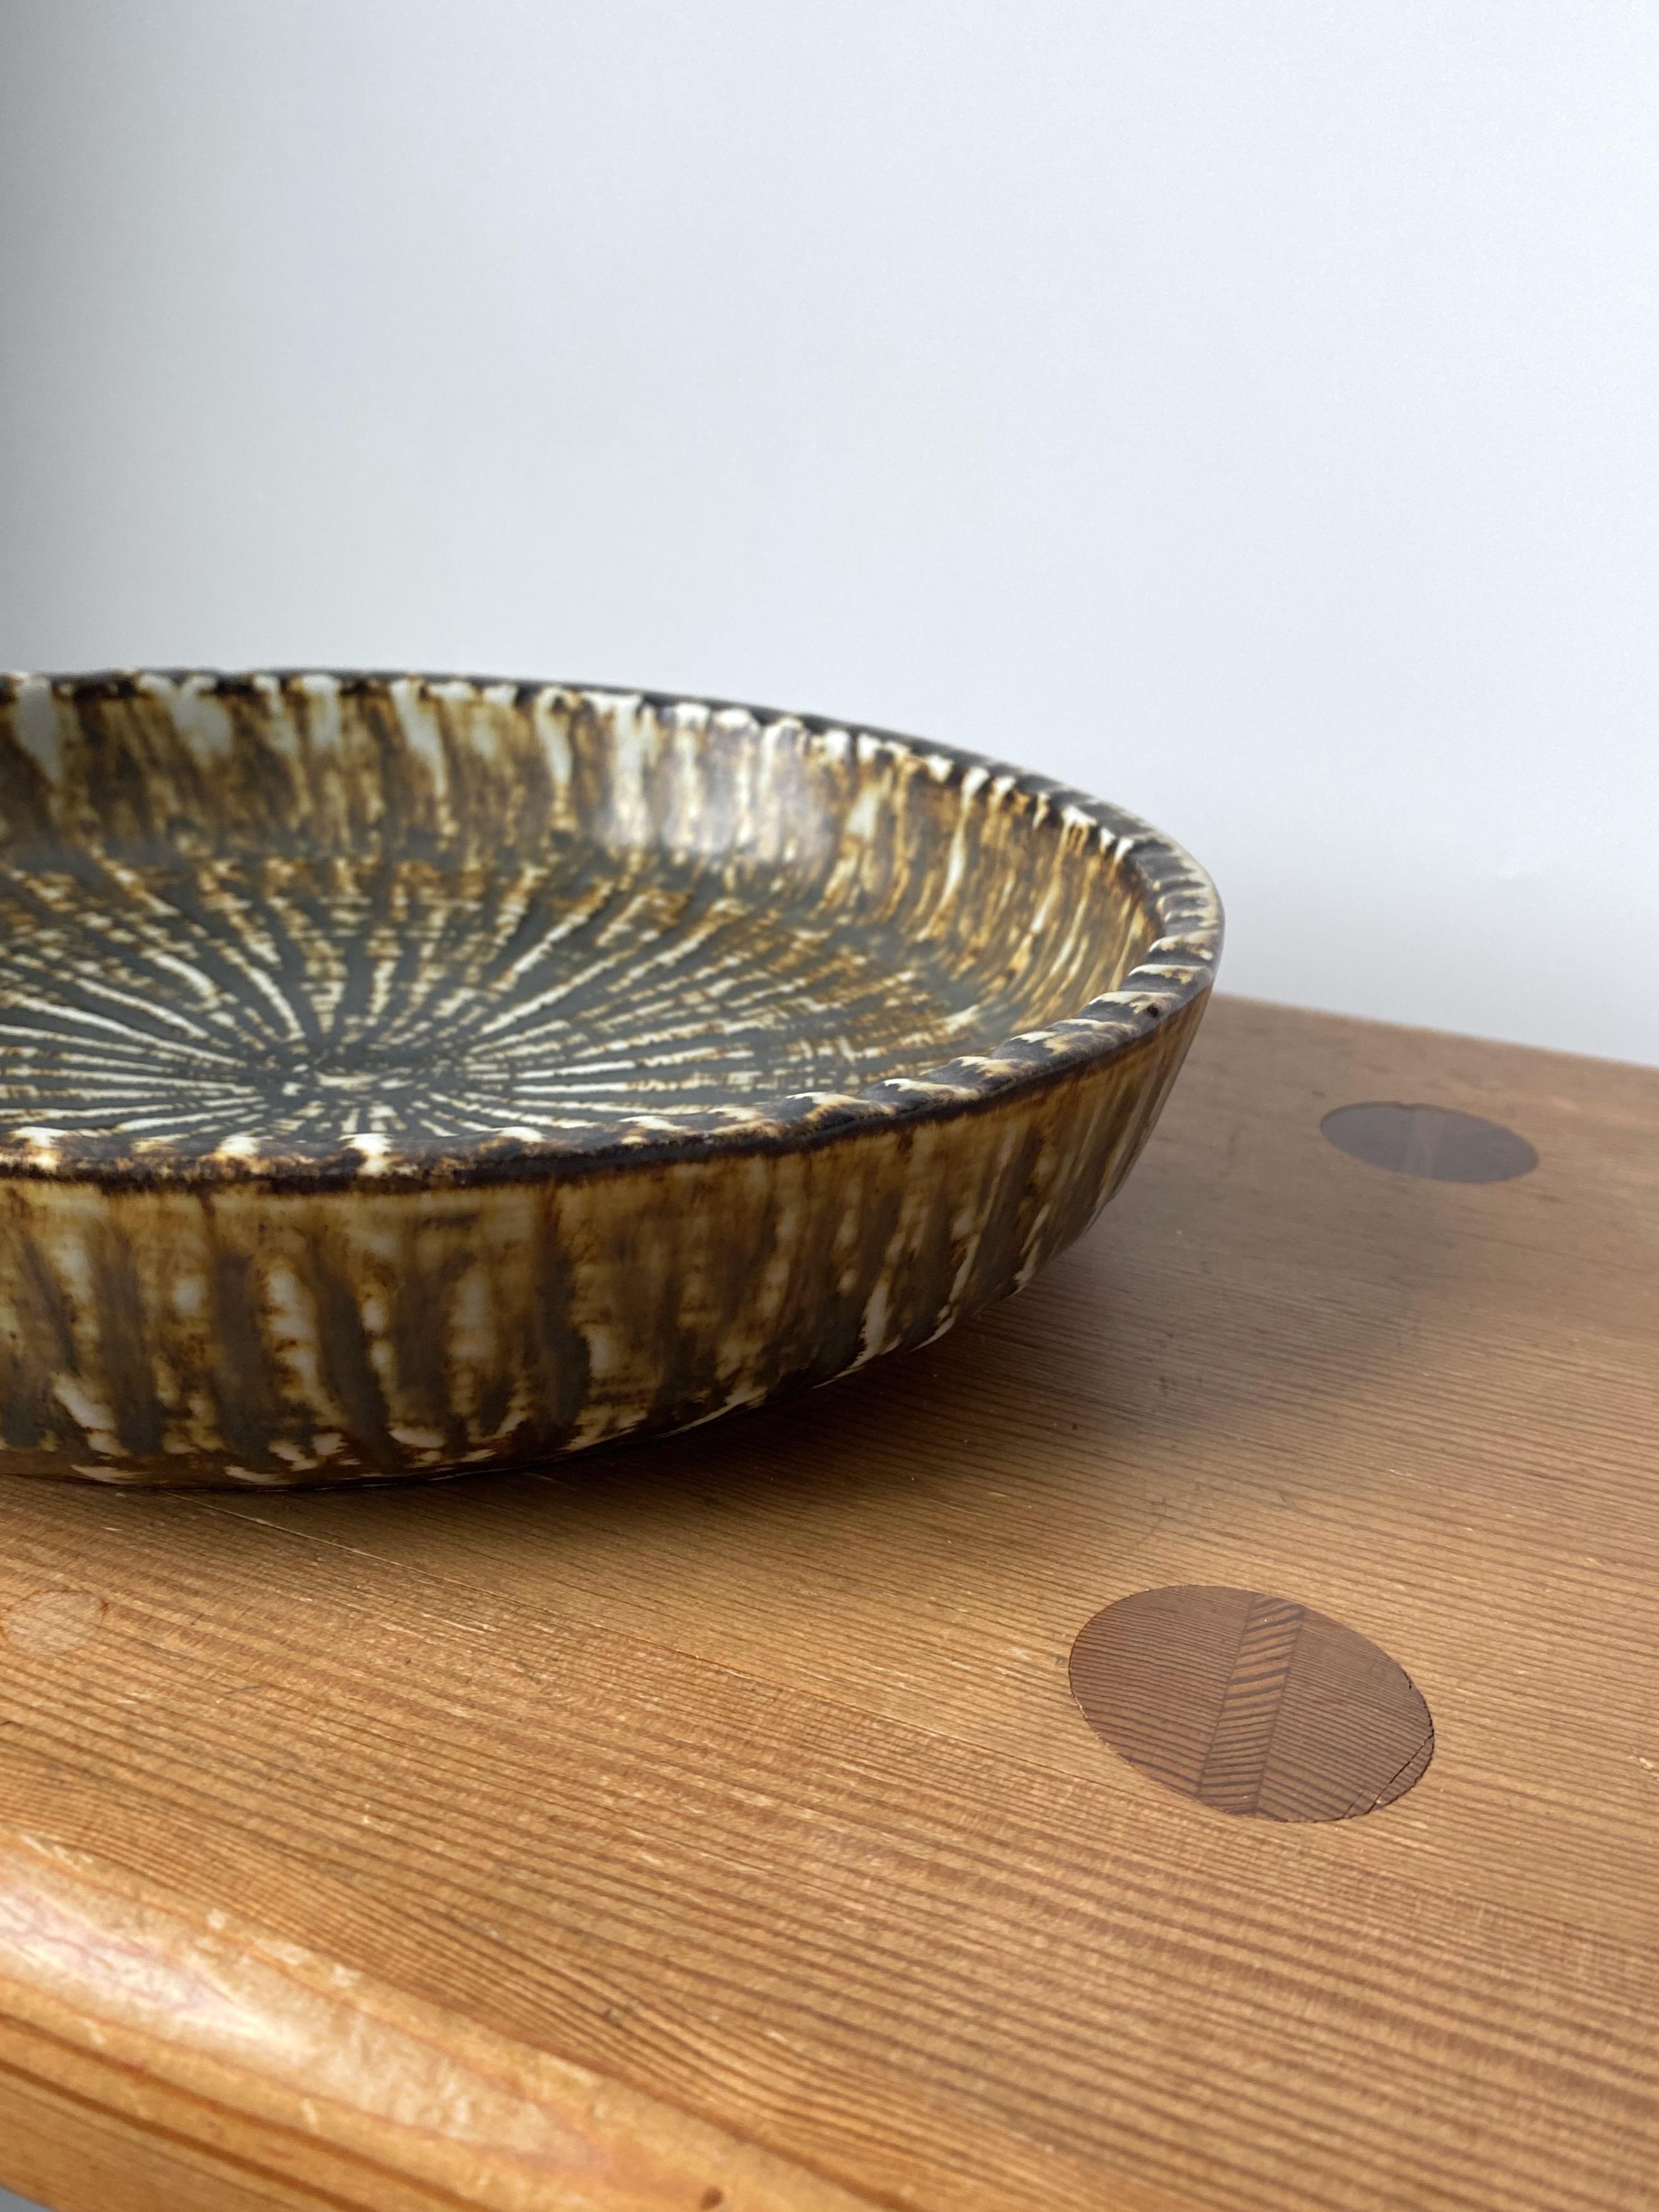 Hand-Crafted Large Robus Ceramic Bowl by Gunnar Nylund